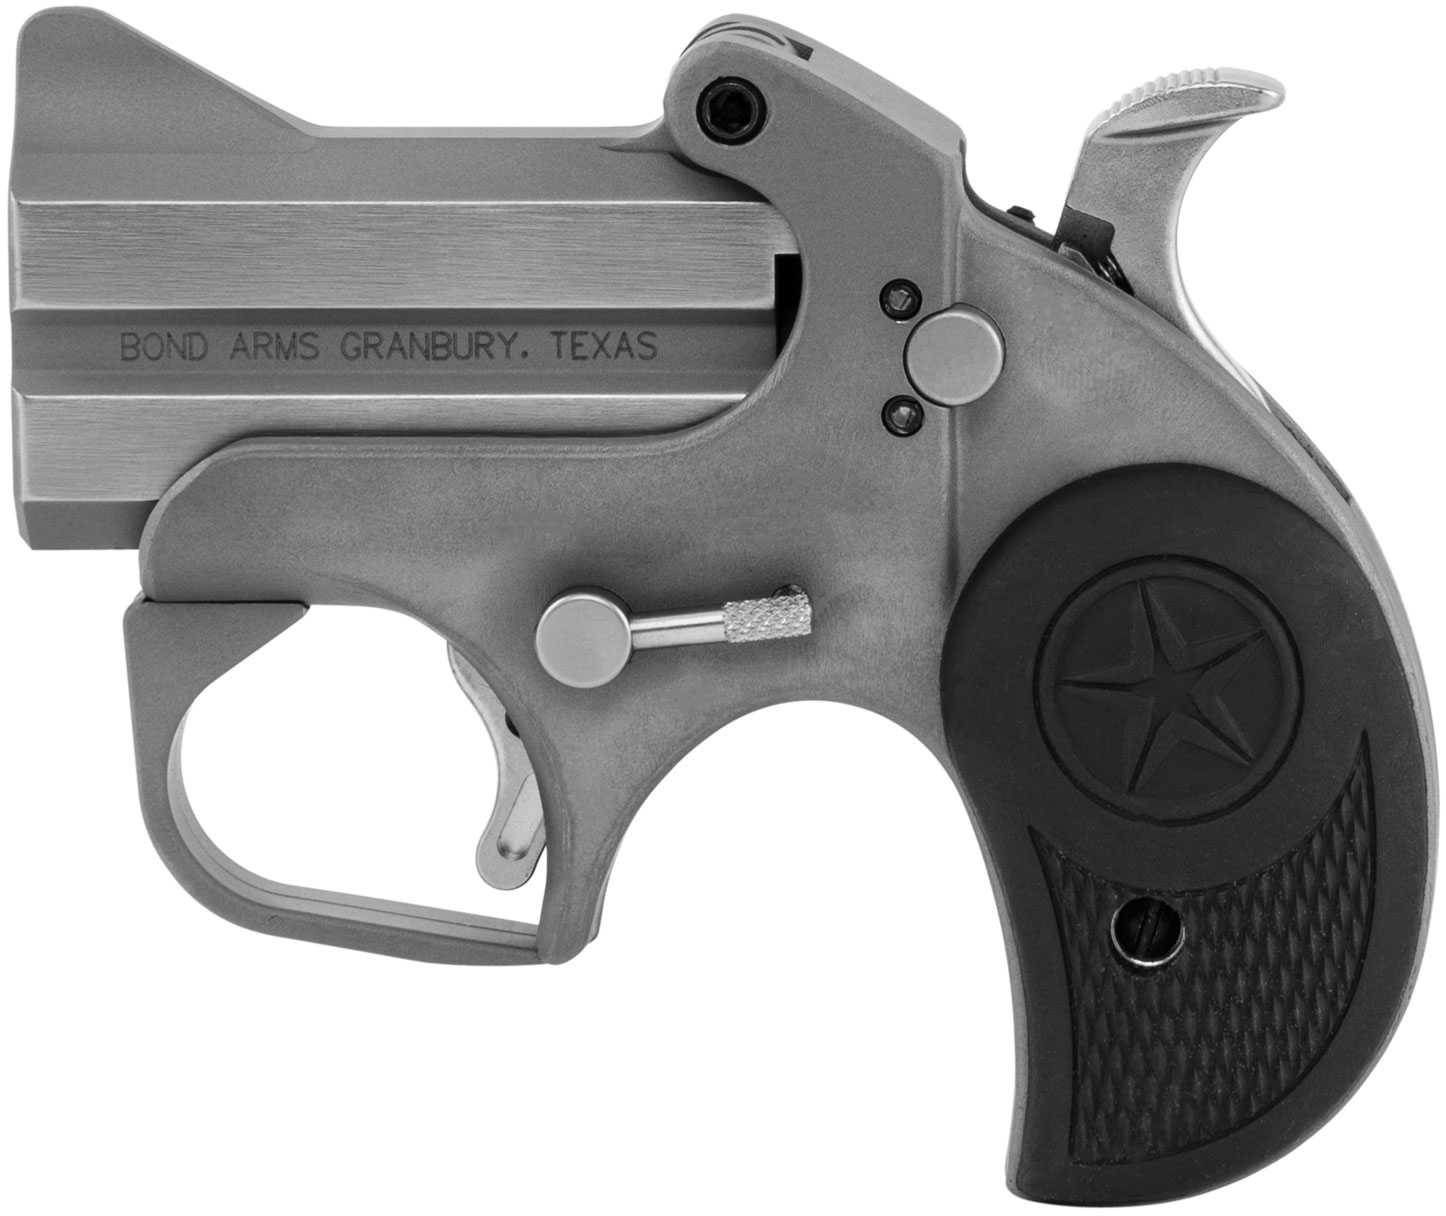 Bond Arms Roughneck 9mm Derringer 2.5" Stainless Steel Barrels Fixed Sights Rubber Grip Matte Finish